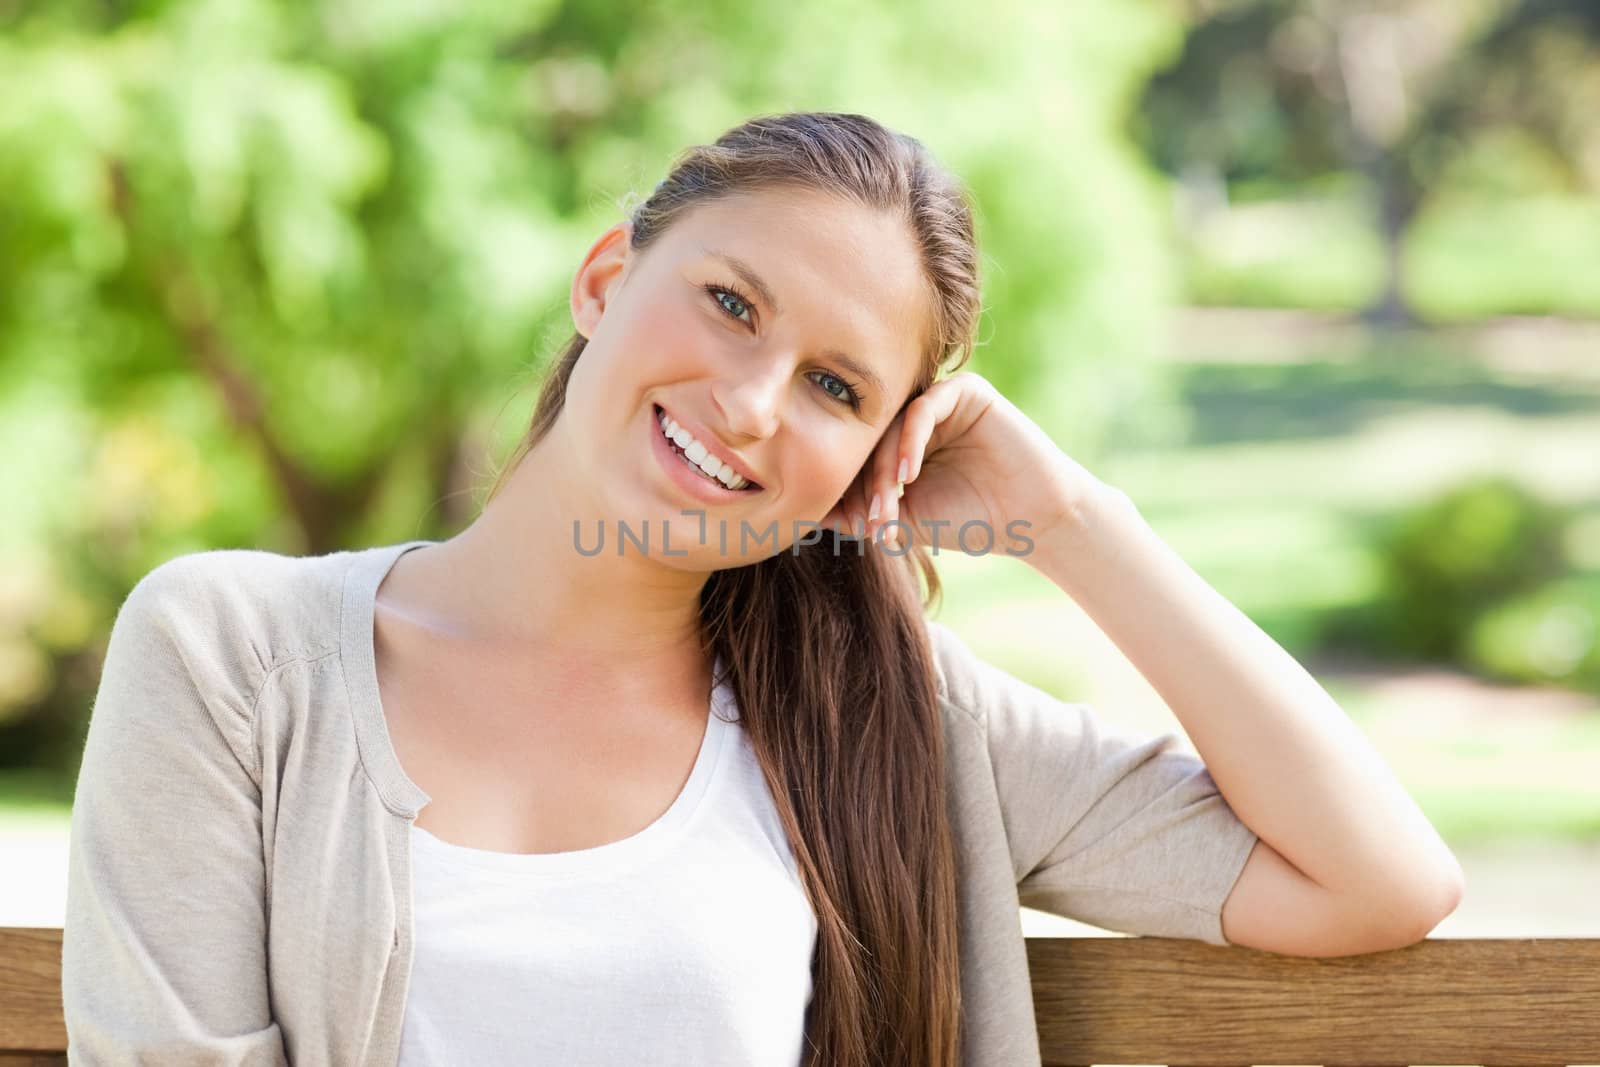 Smiling young woman enjoying her day on a bench